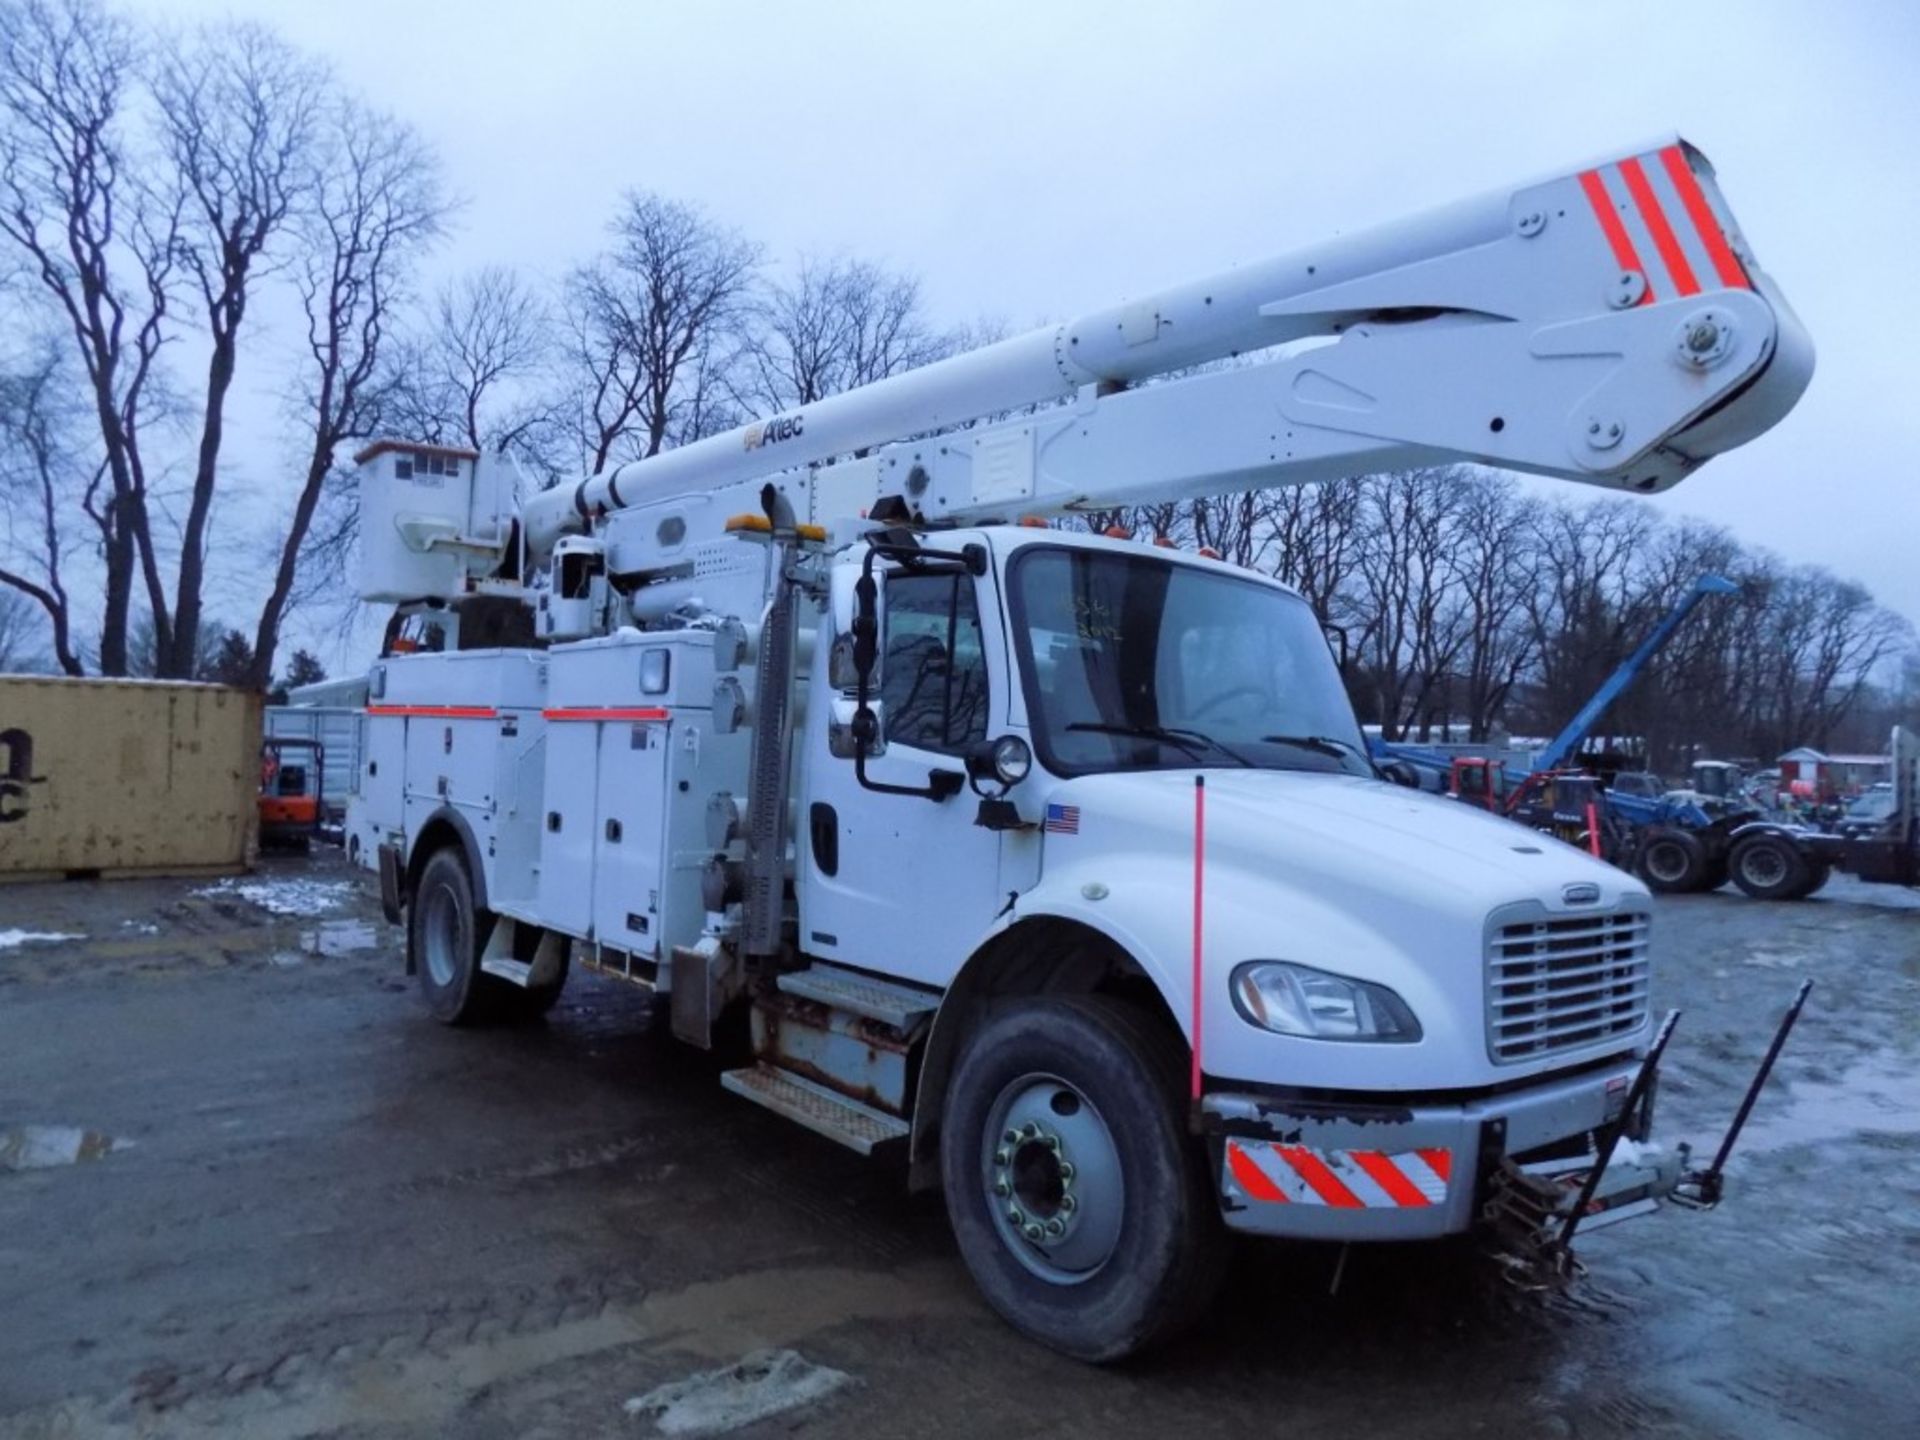 2012 Freightliner Business Class M2 Bucket Truck, Altec 55' Boom on Body with Down Riggers, 2 WD, - Image 4 of 9